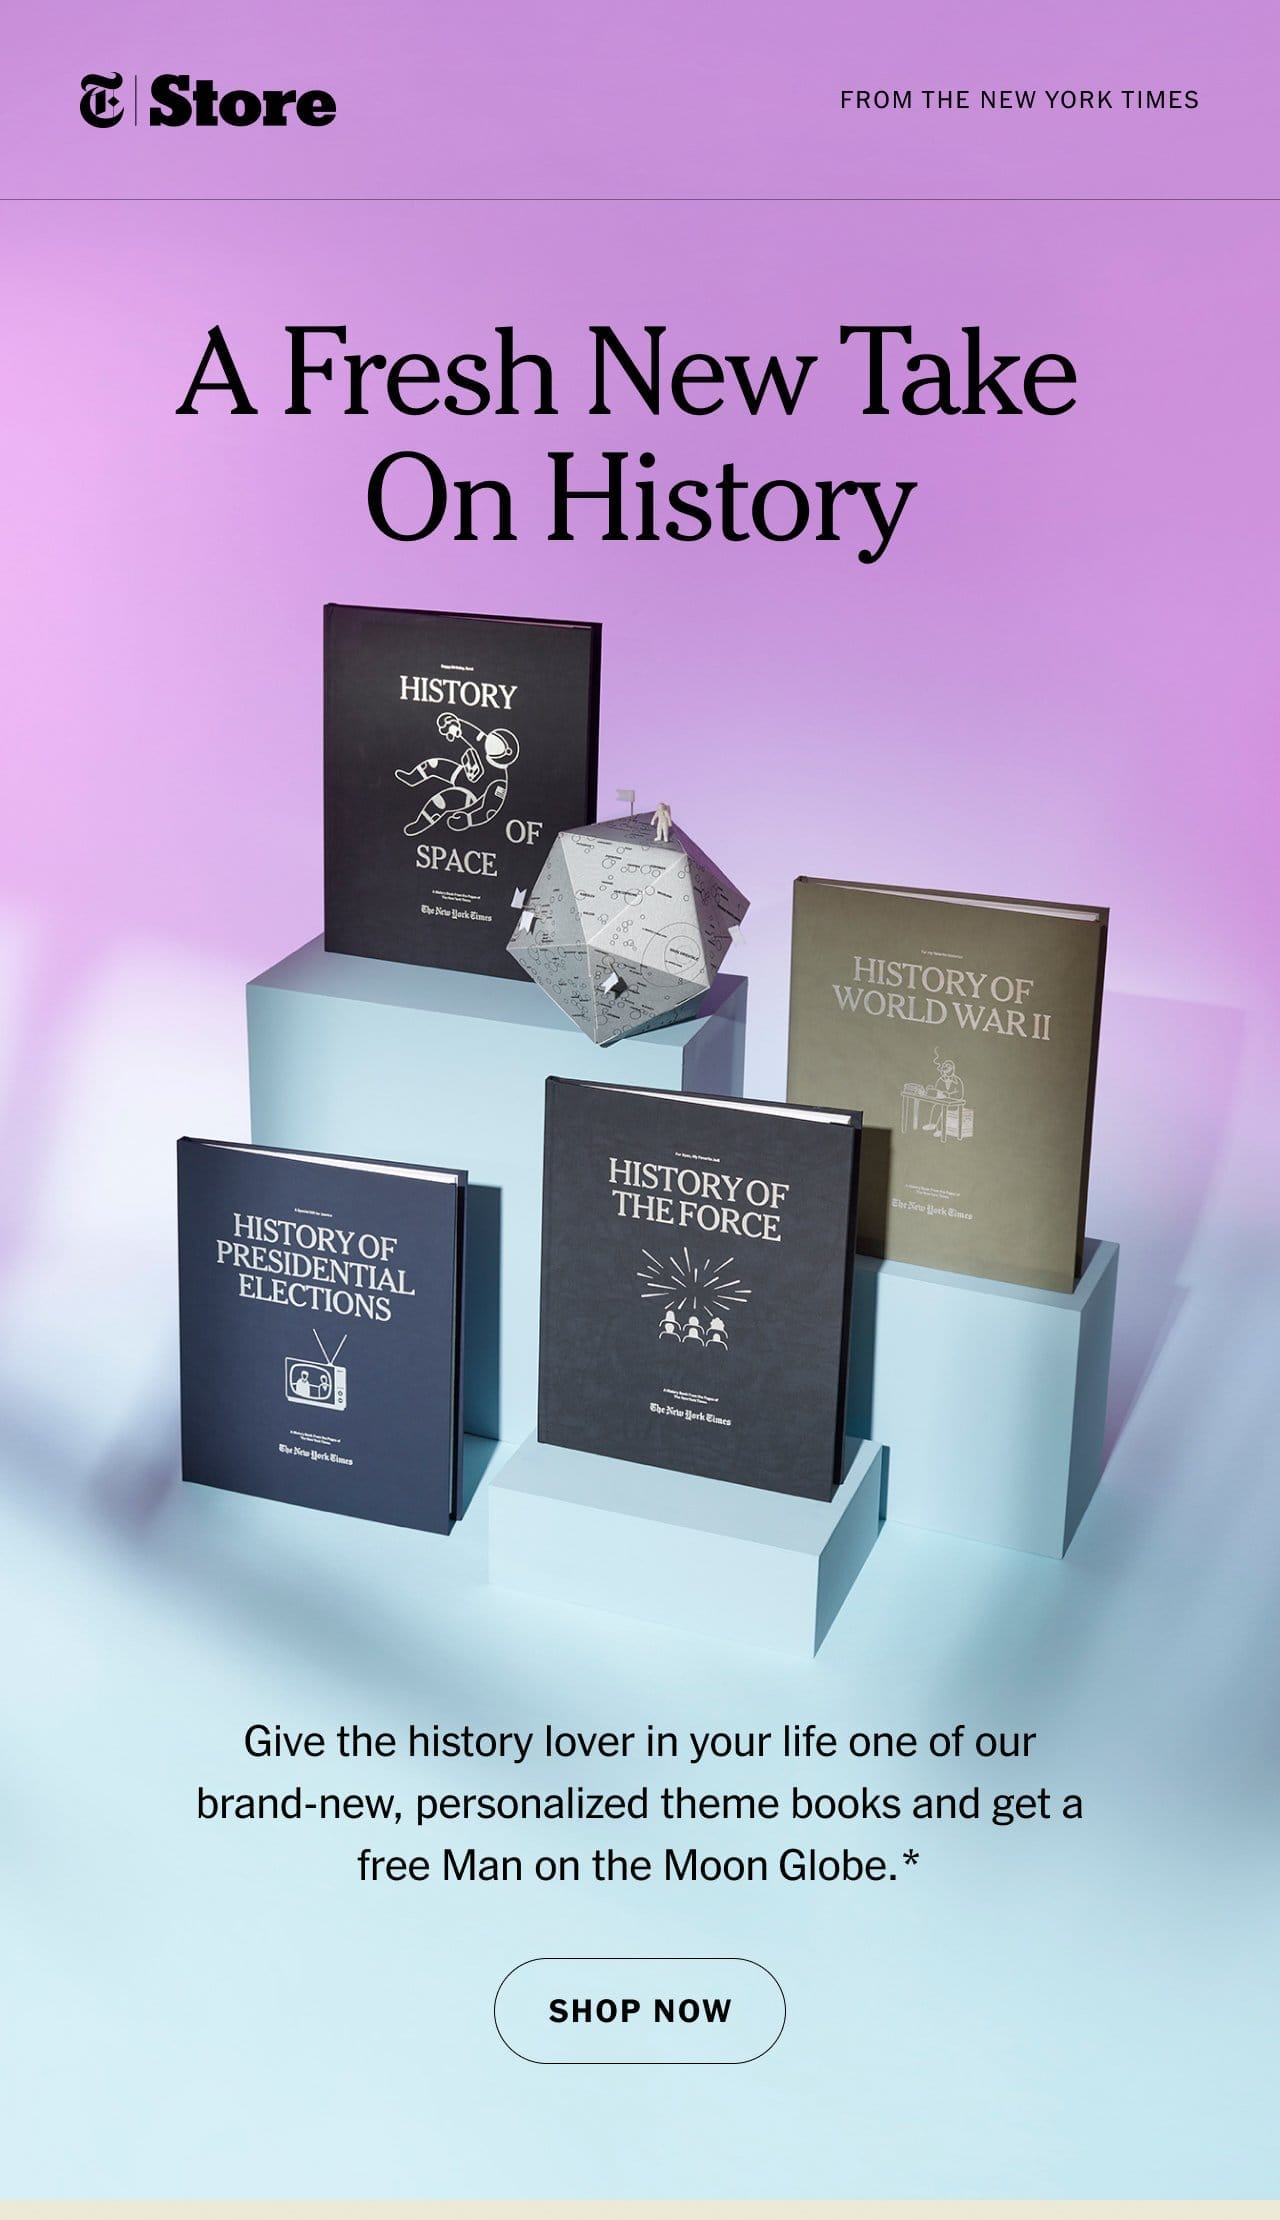 A Fresh New Take on History. Give the history lover in your life one of our brand-new, personalized theme books and get a free Man on the Moon Globe.* Shop Now.